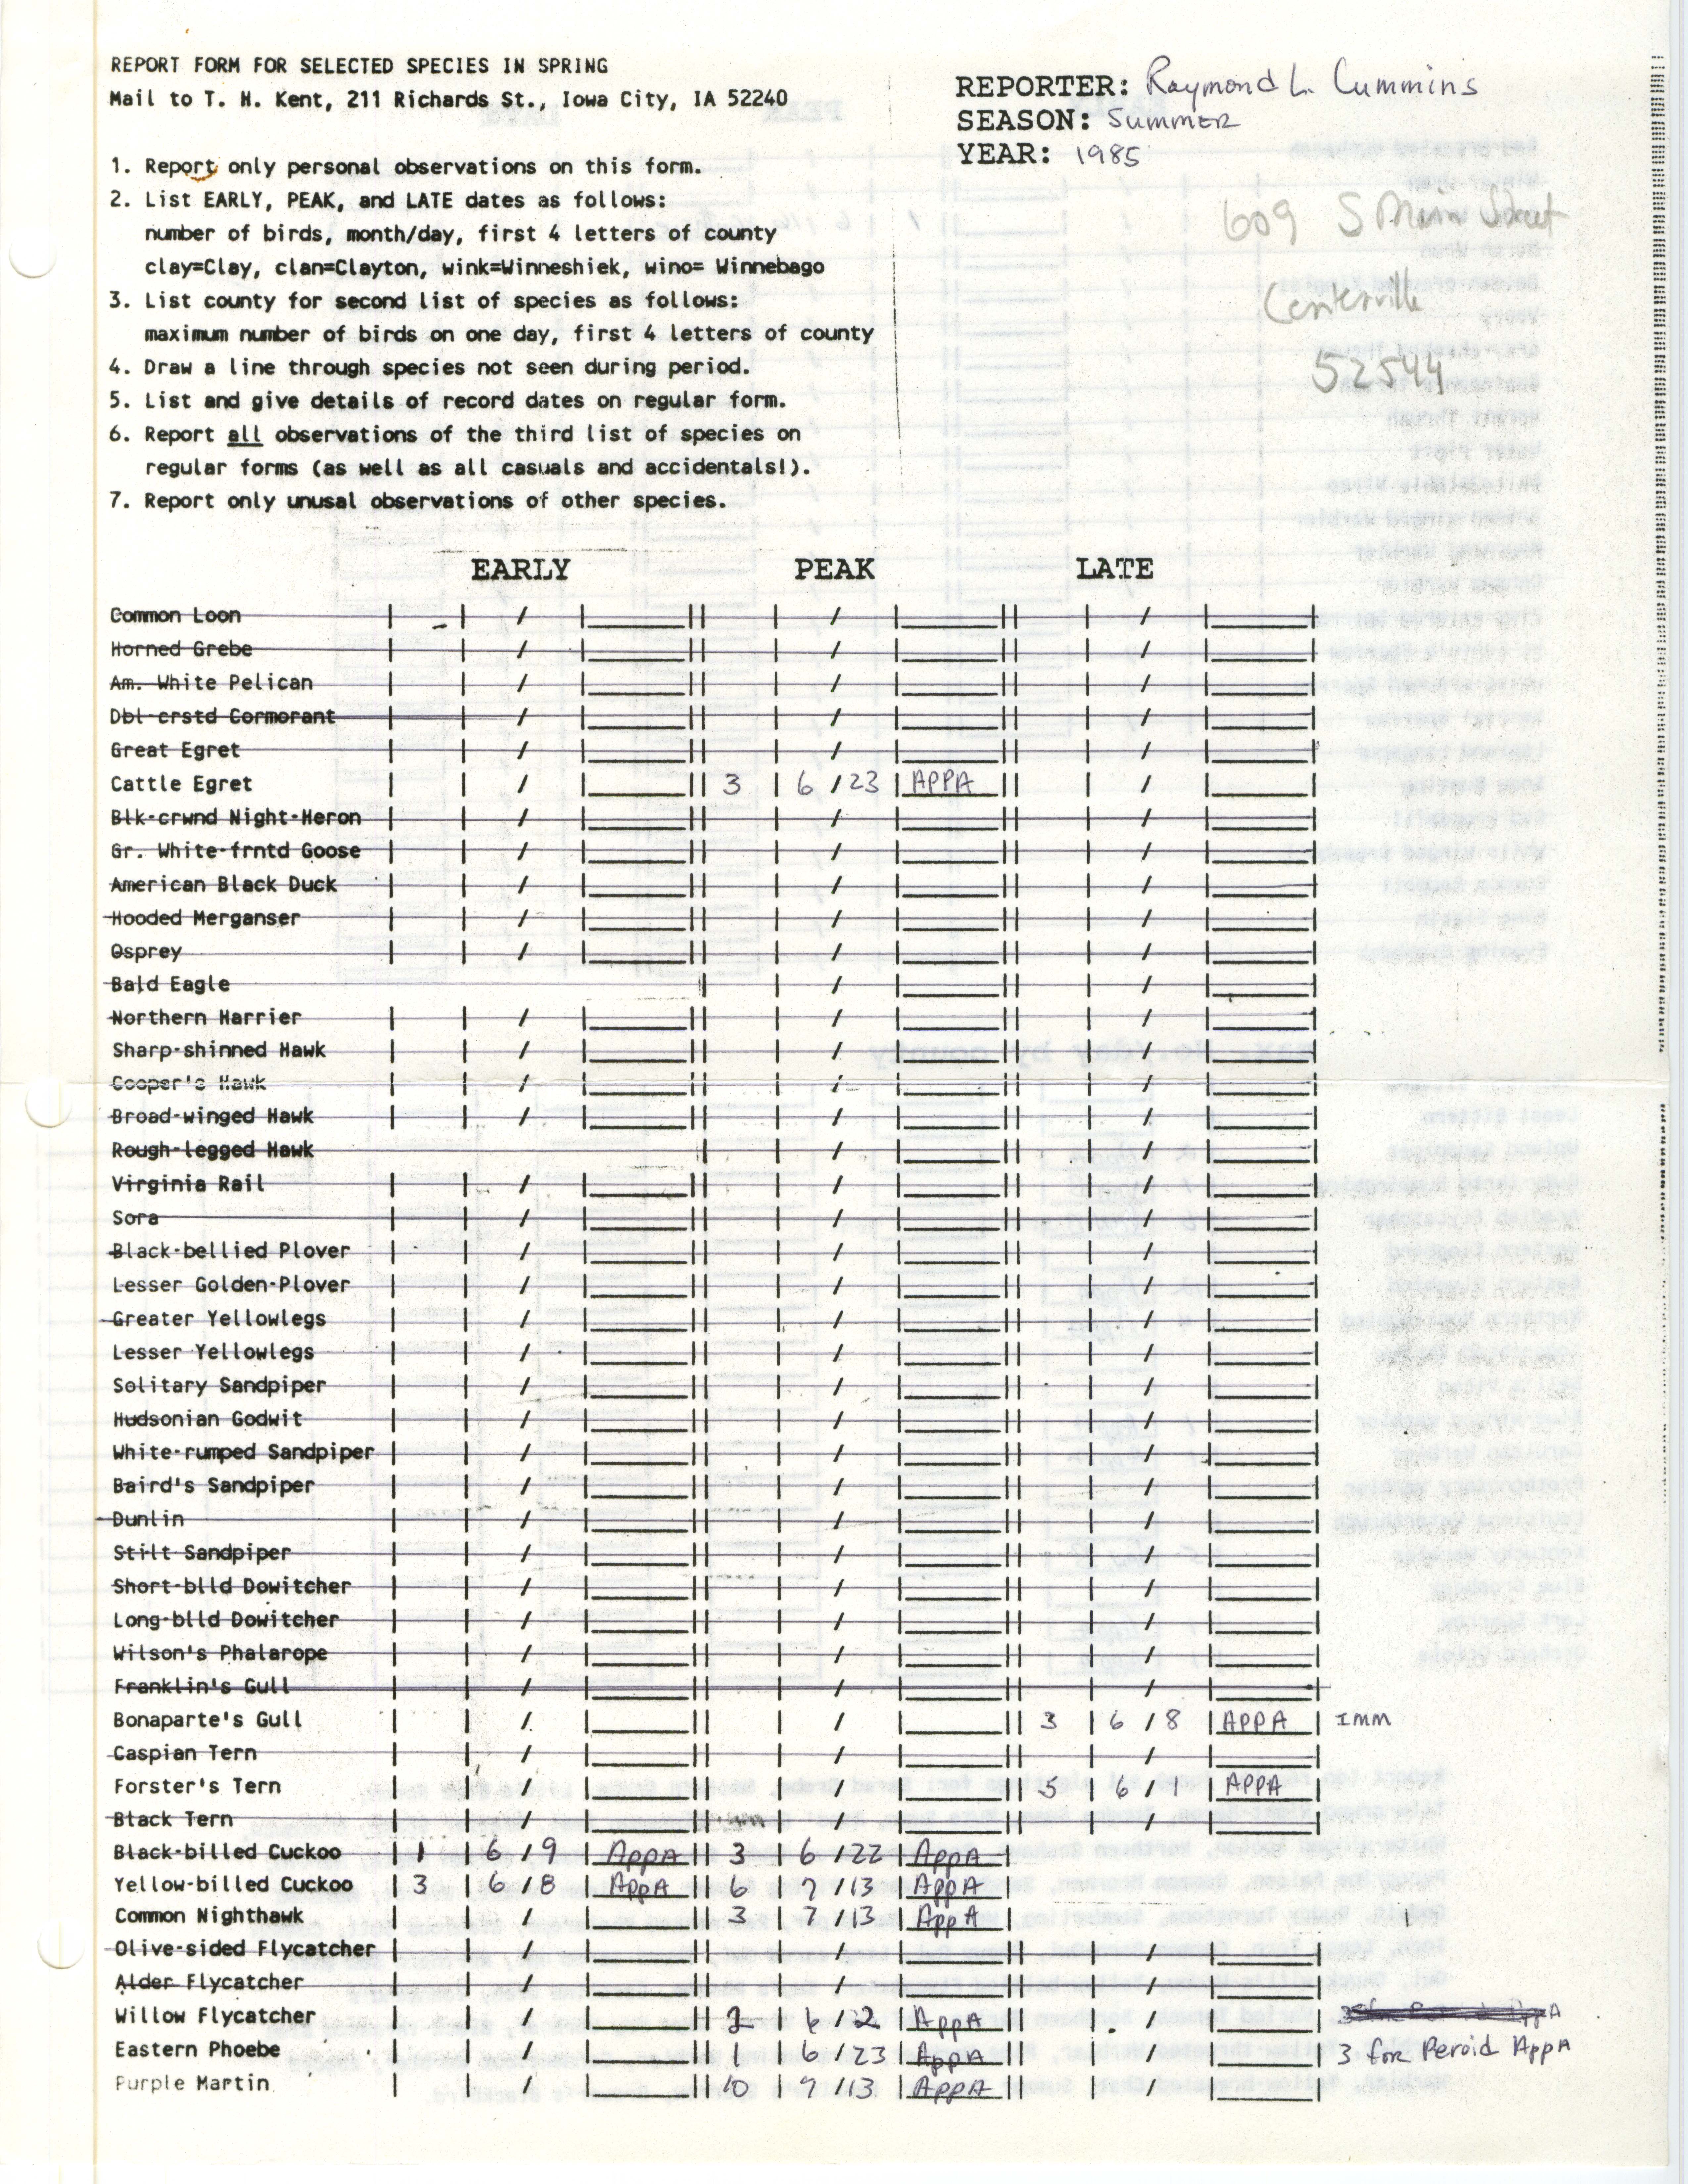 Field notes contributed by Raymond L. Cummins, summer 1985